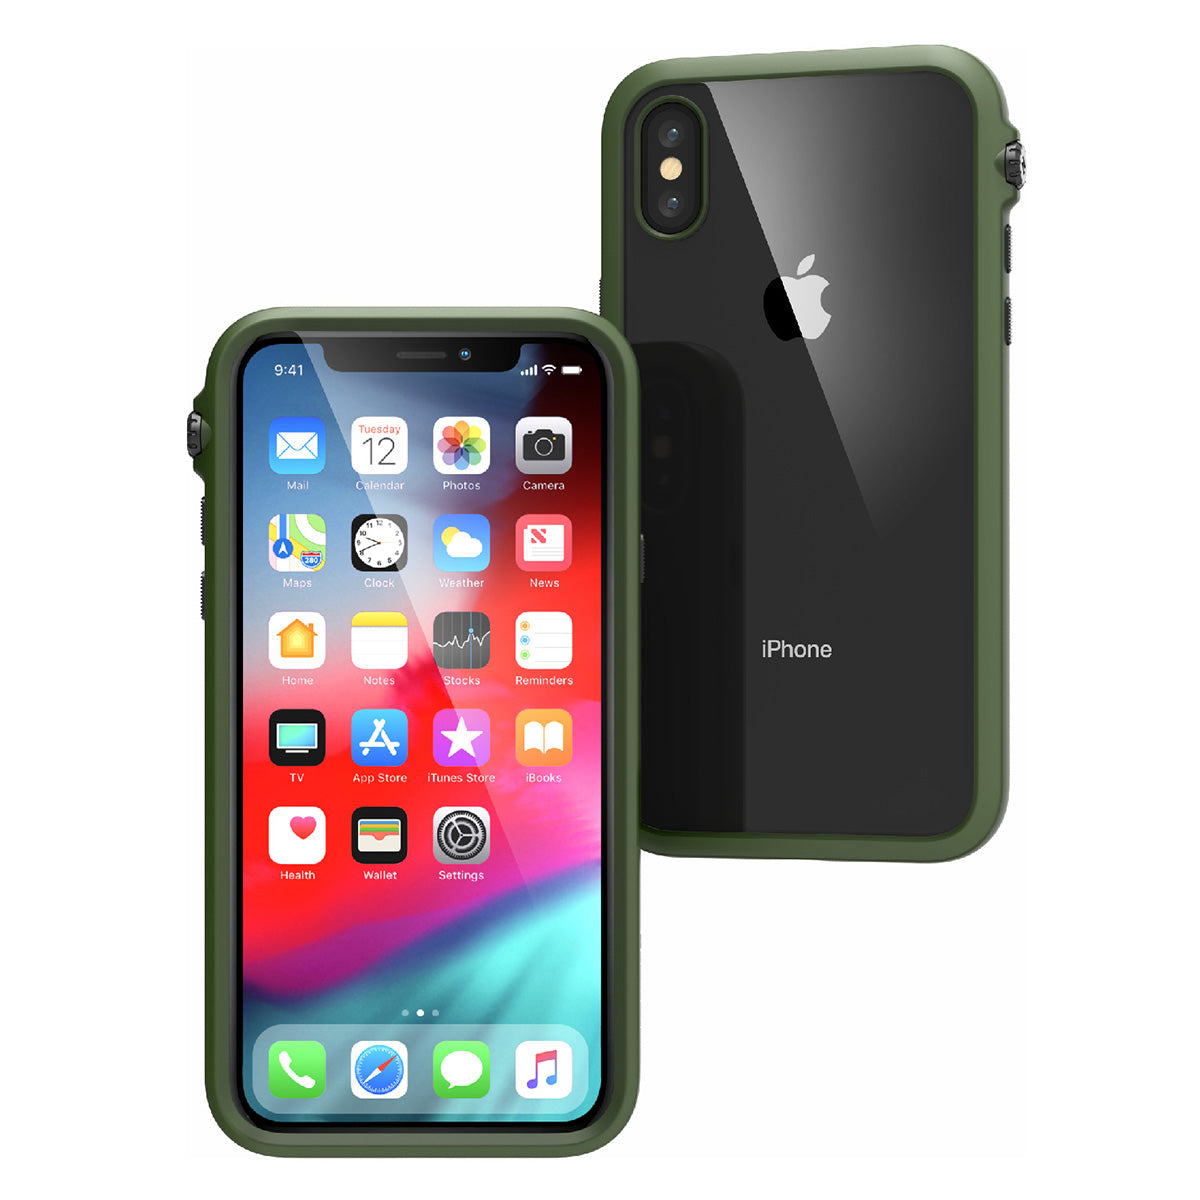 Catalyst Impact Protection Case for iPhone X/XR/Xs/Xs Max showing the front and back of the iphone with the catalyst case installed